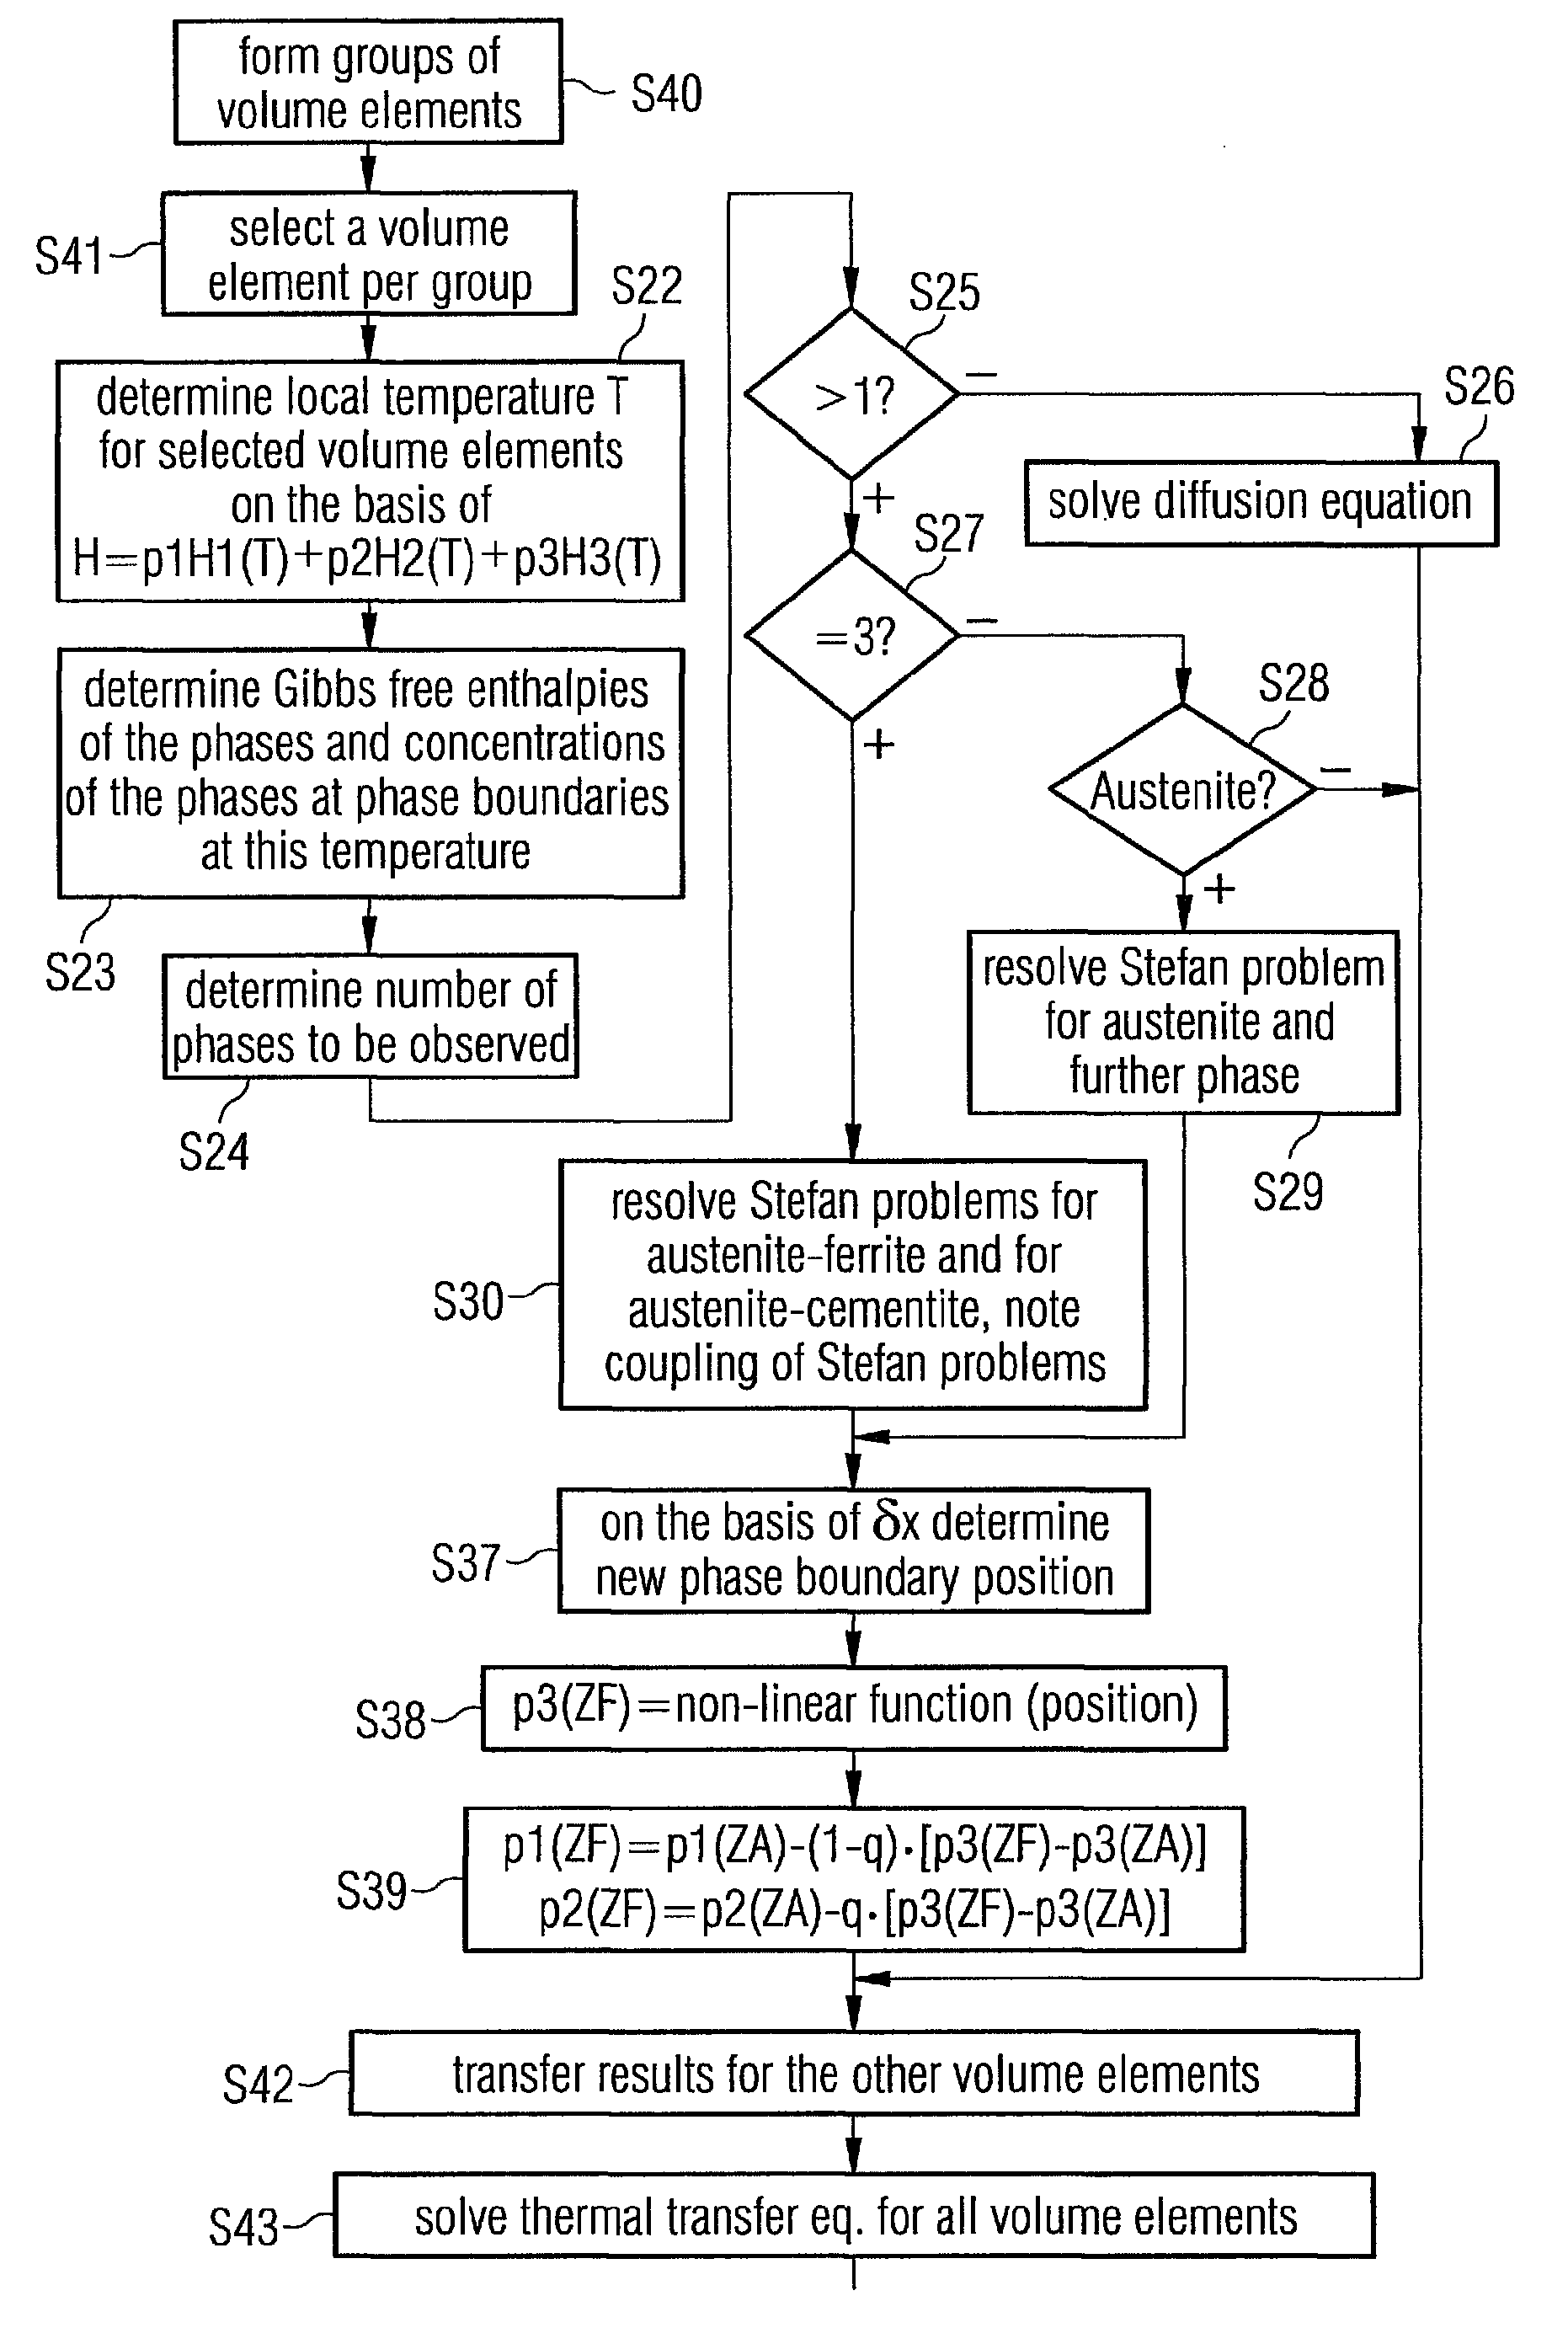 Computer-assisted modelling method for the behavior of a steel volume having a volumetric surface